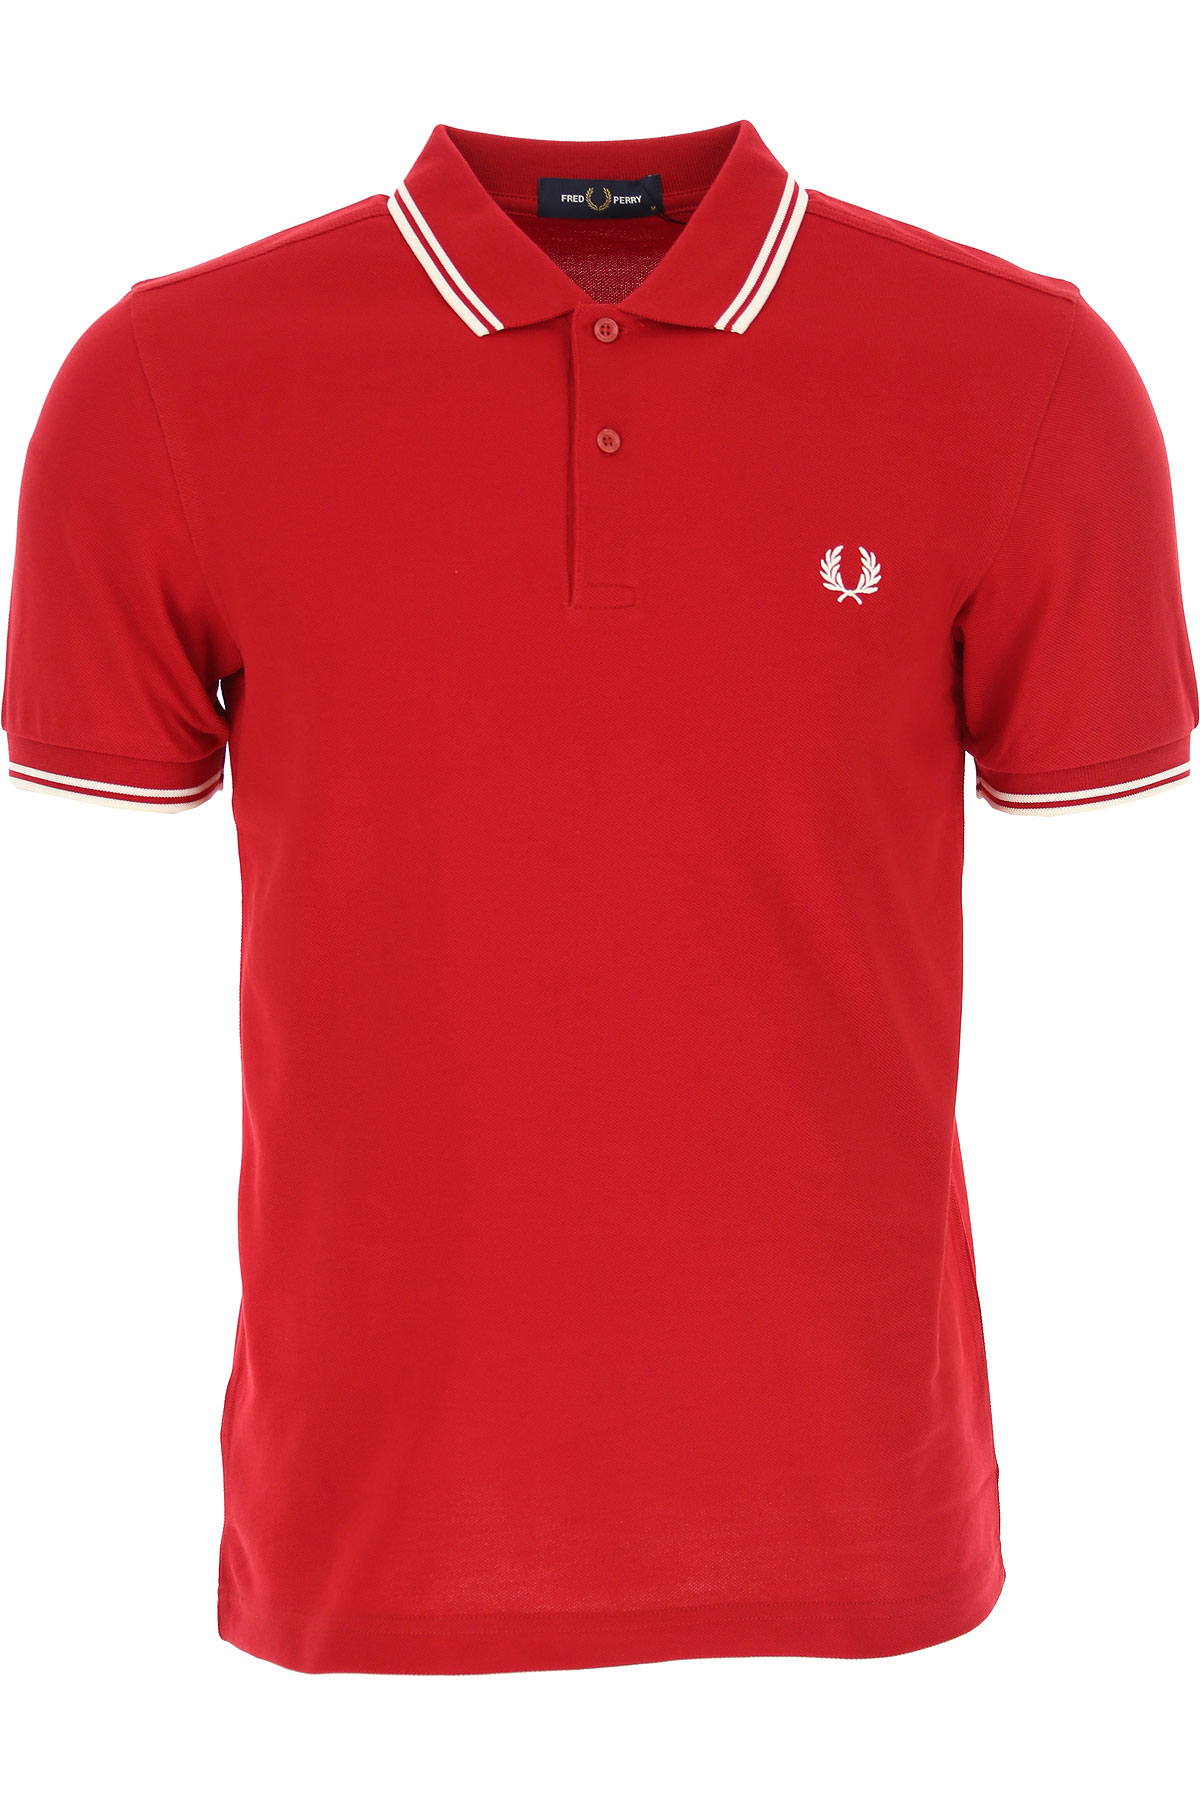 Mens Clothing Fred Perry, Style code: m3600-l56-